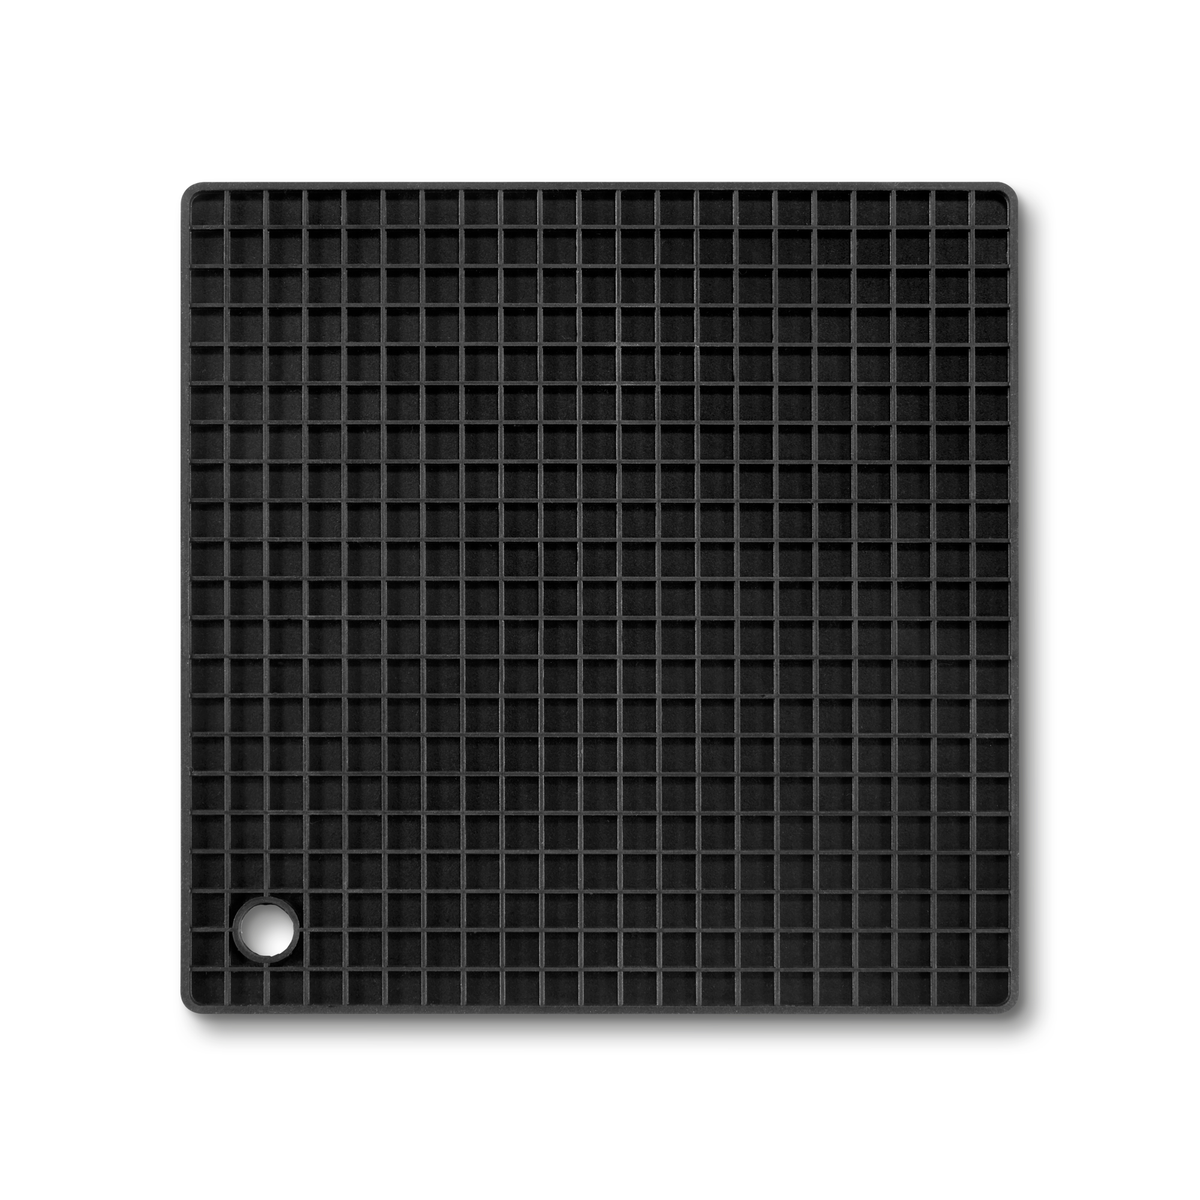 Top view of black silicone trivet showing grid pattern and hanging hole.